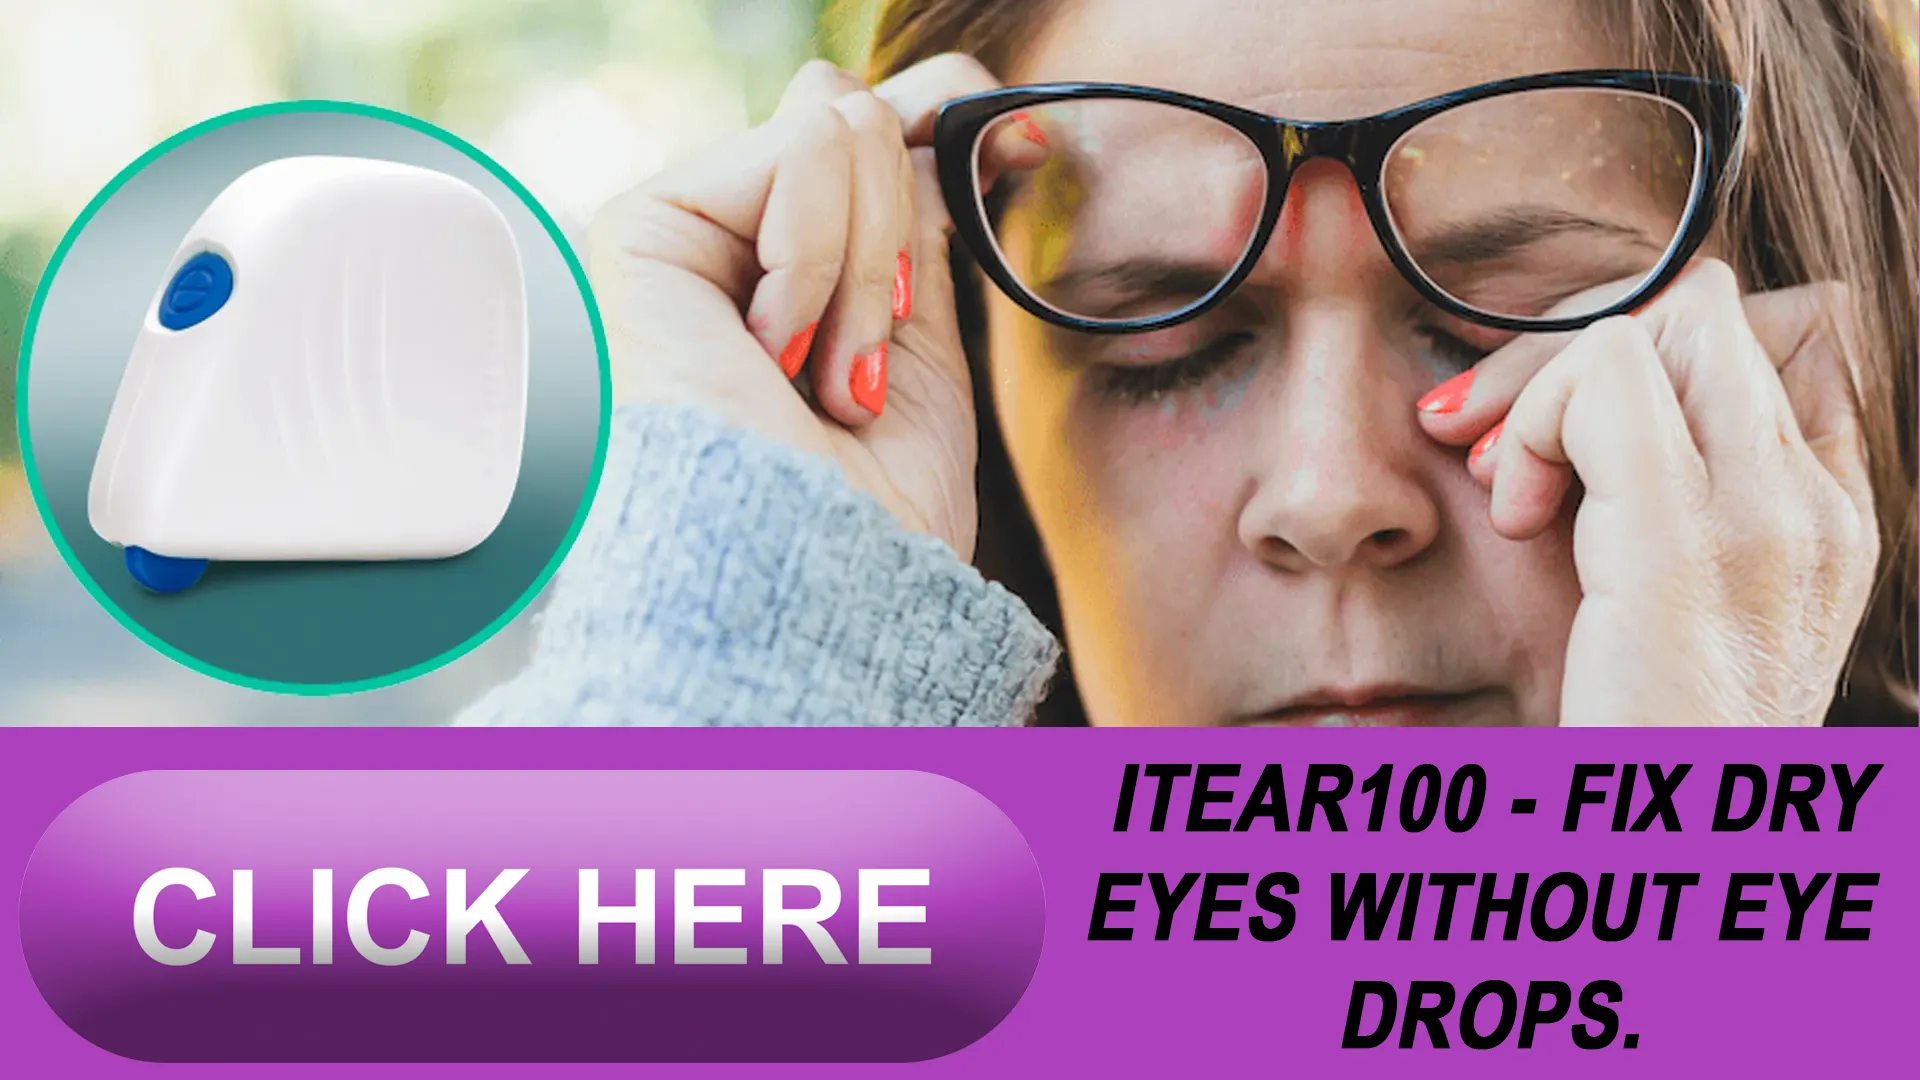 5. The Magic of the iTEAR100 Device